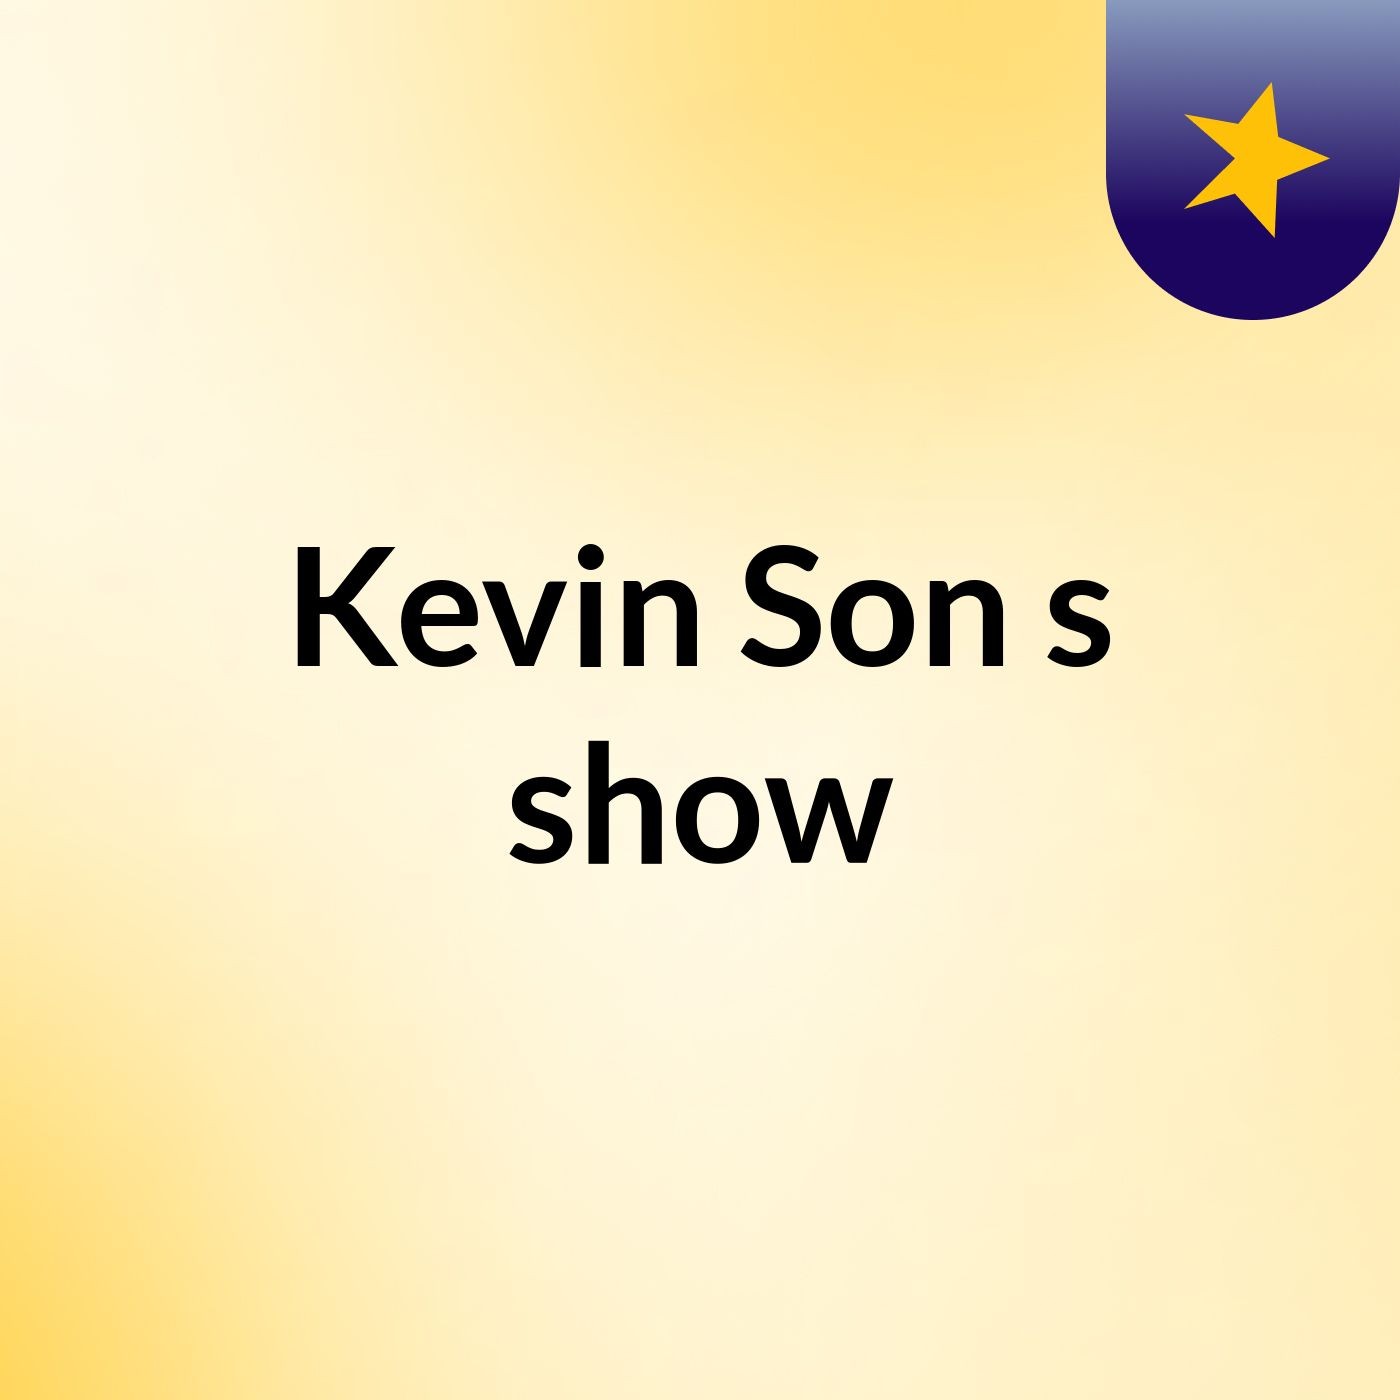 Kevin Son's show